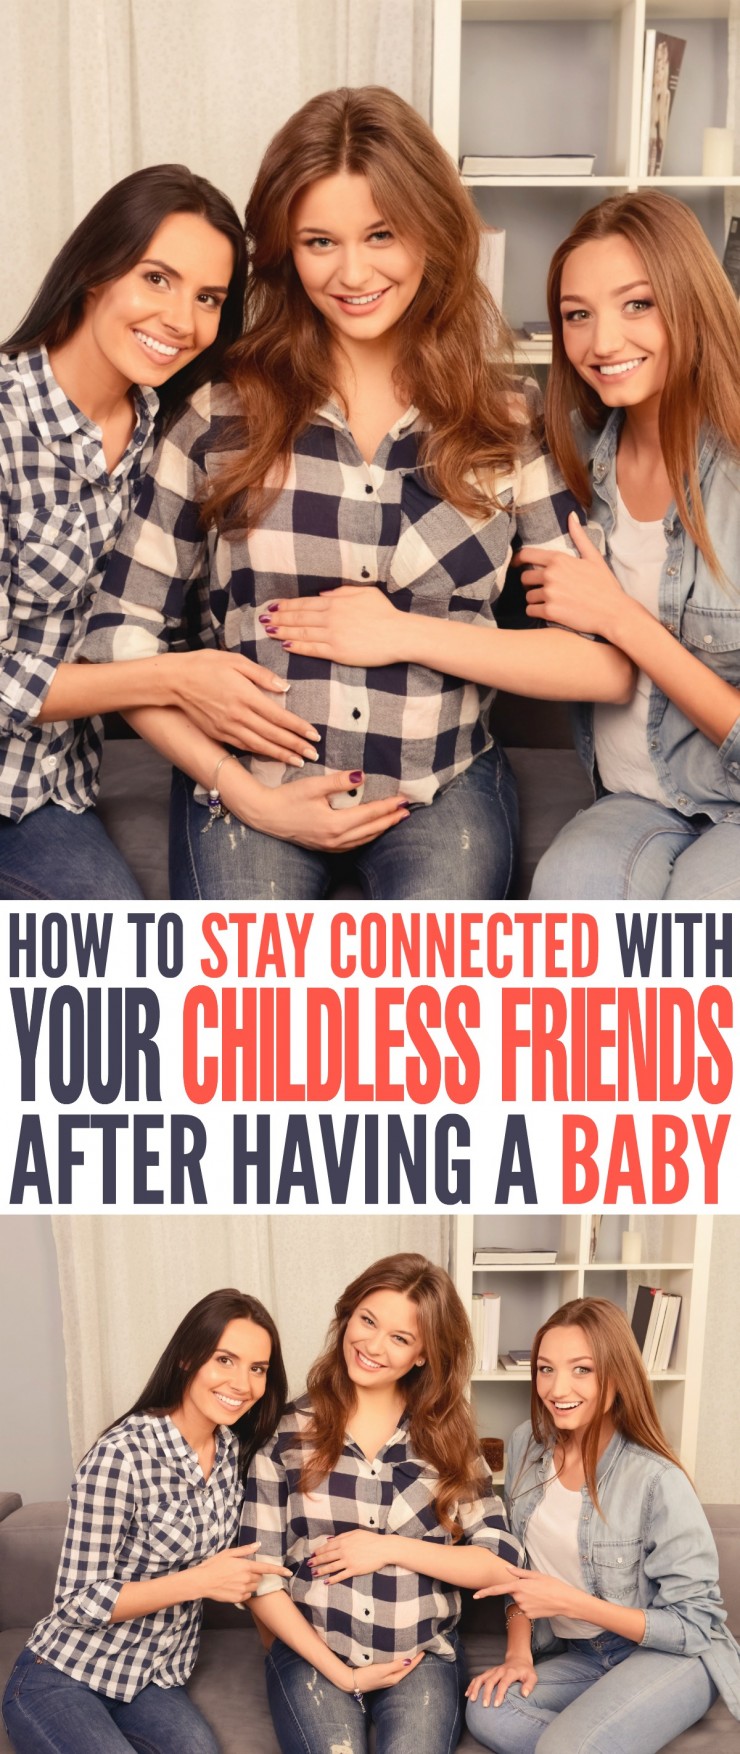 It definitely takes a lot of work to maintain relationships with friends after you first become a mom, but using these tips can help you stay connected with your childless friends after having a baby.